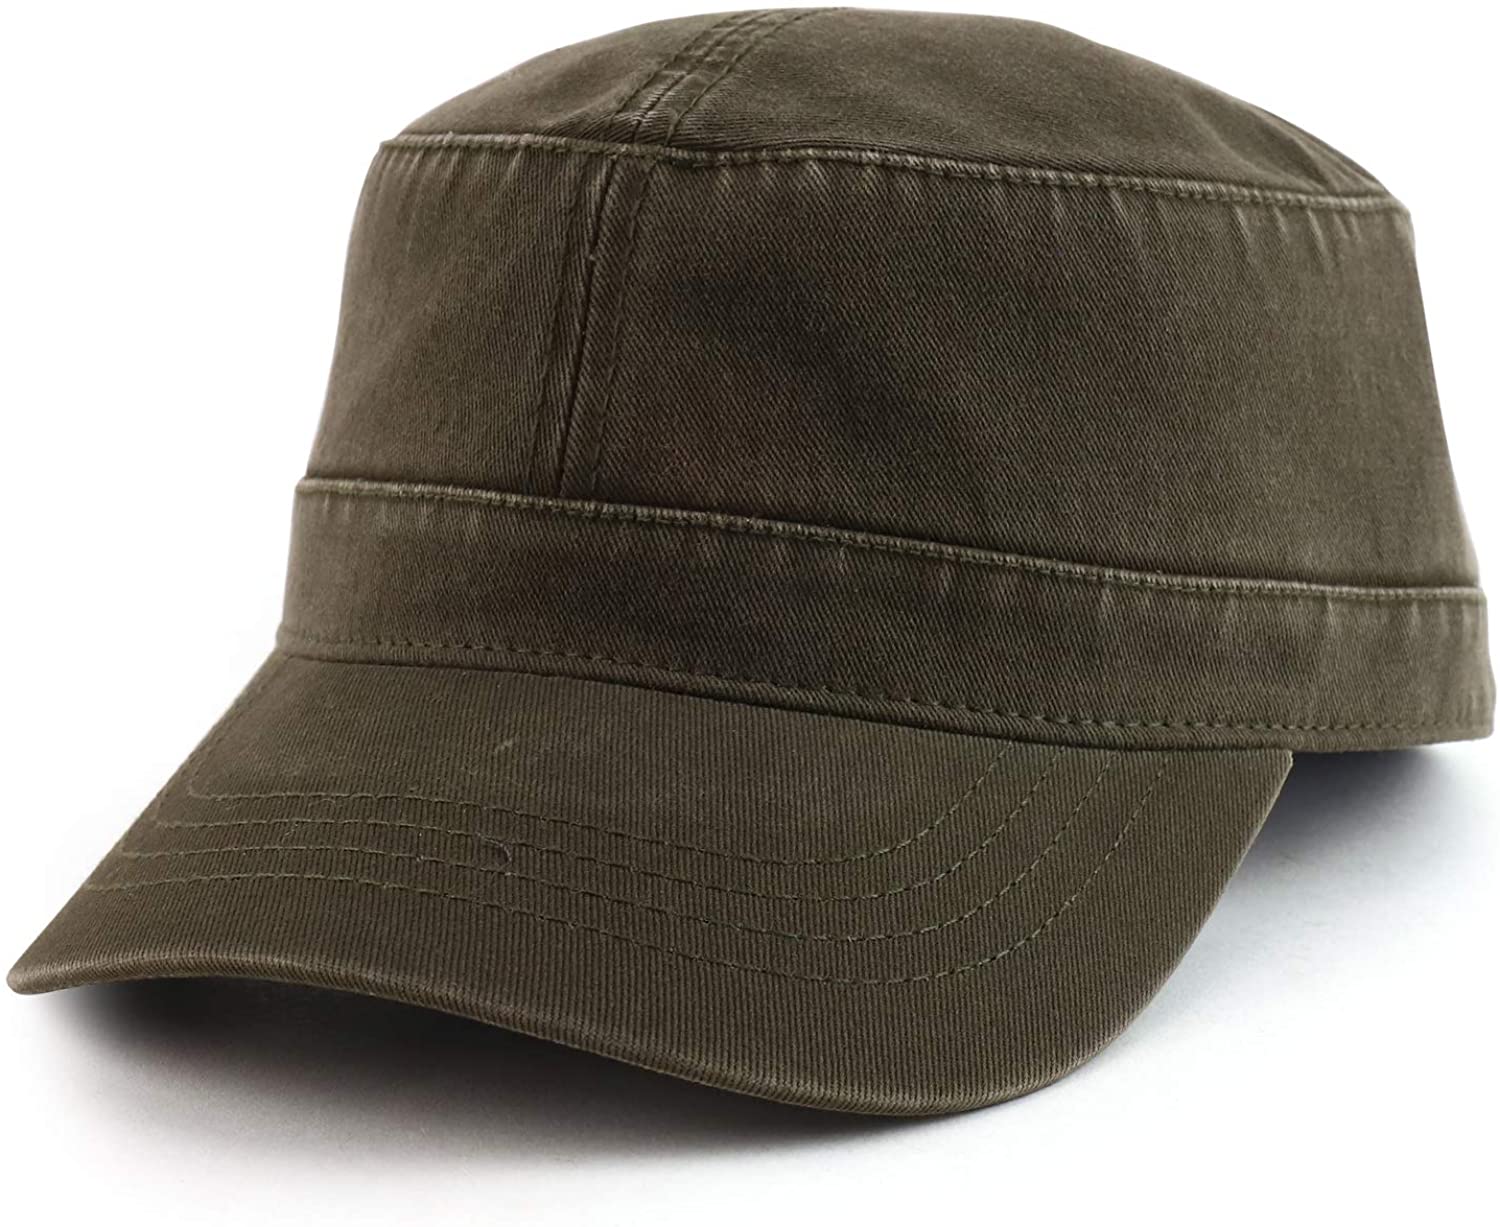 Armycrew Oversized Big 2XL Flat Top Army Style Cotton Military Cap